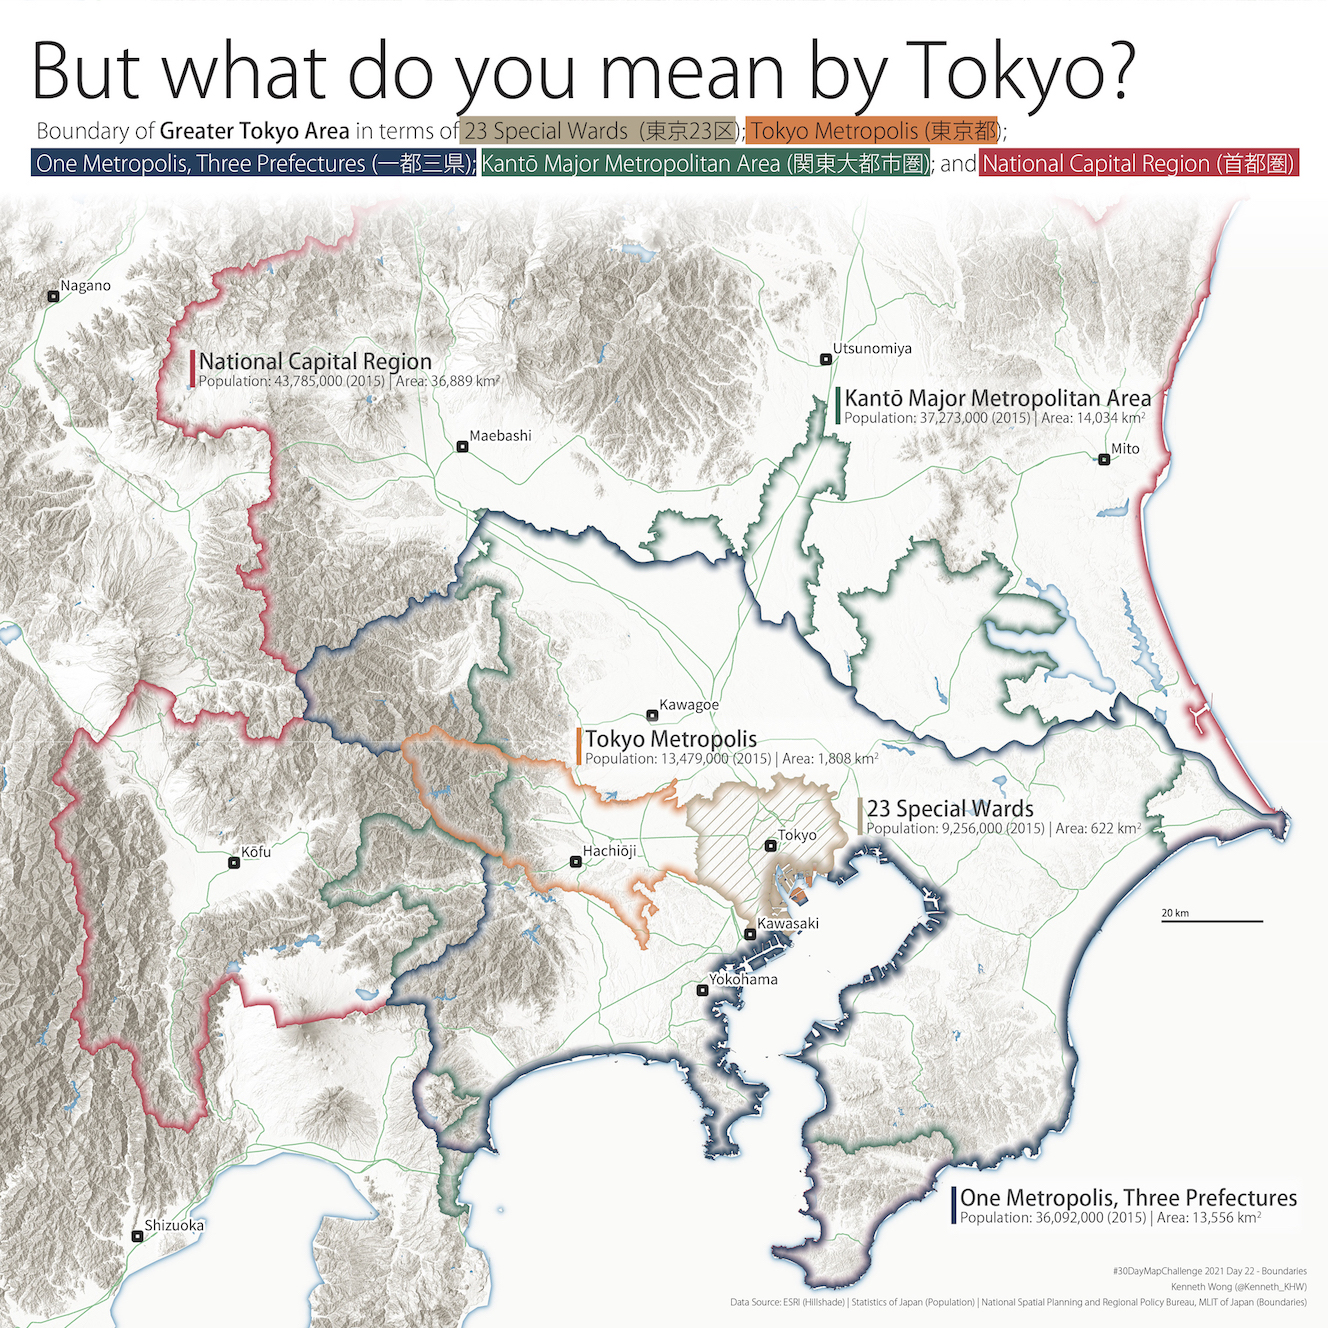 Mapping the boundaries of Tokyo using various definitions